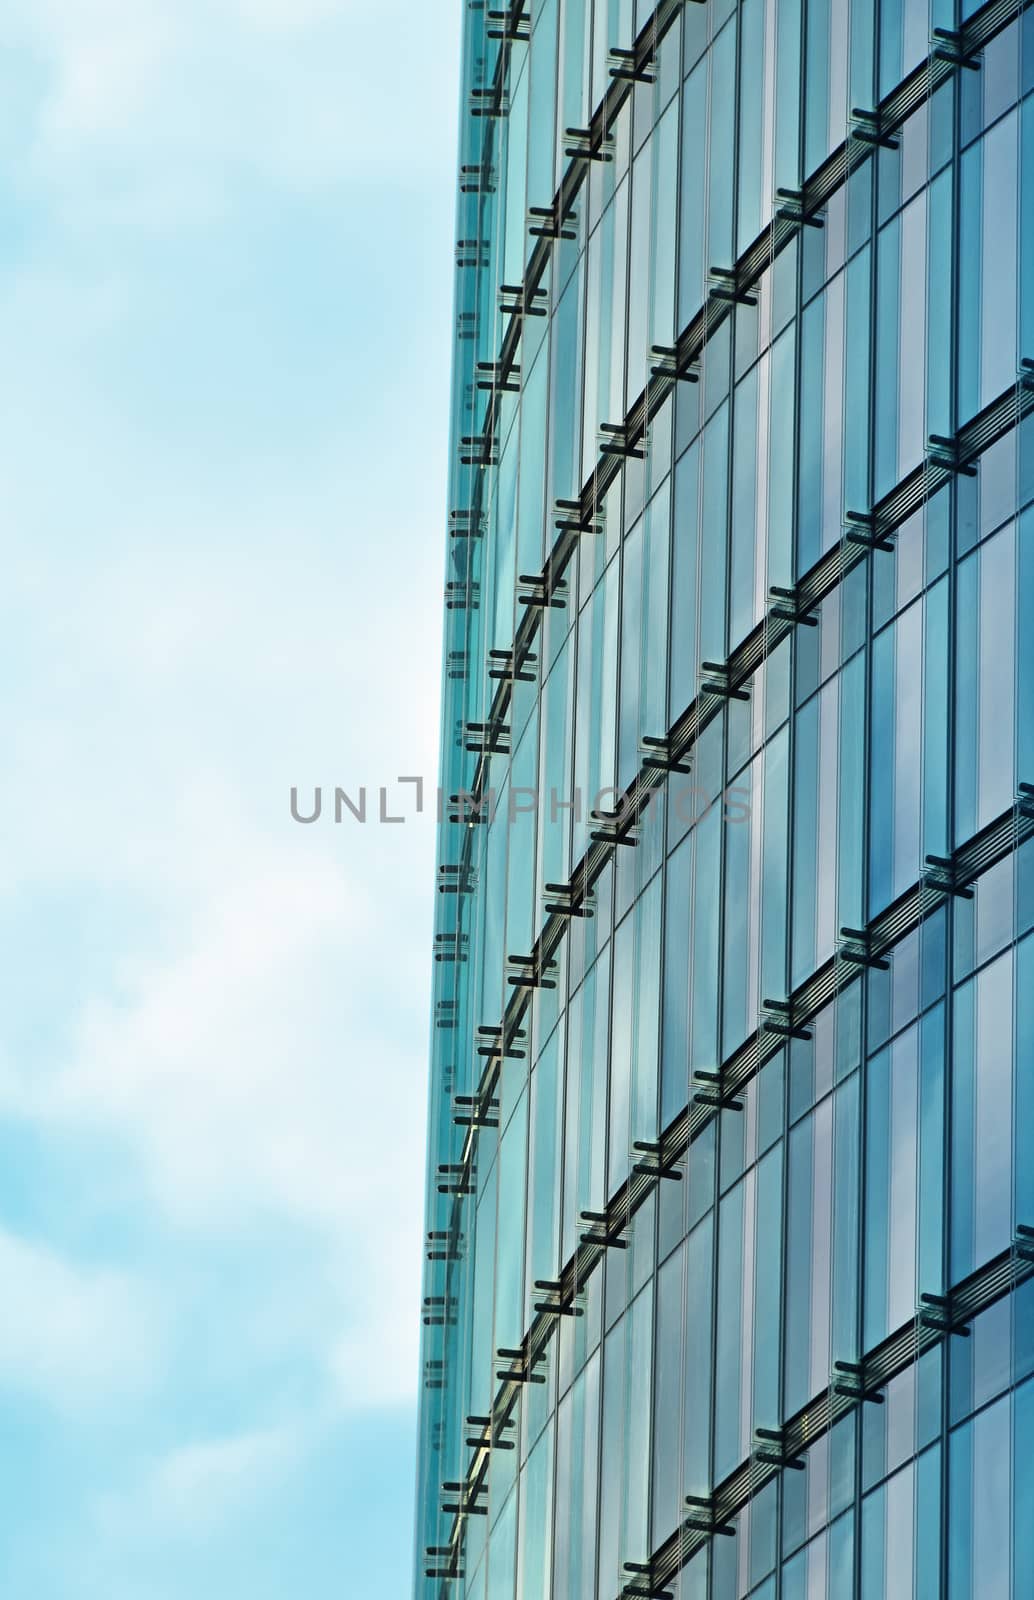 Background texture of modern business skyscraper building glass windows pattern with reflection over cloudy blue sky, low angle view